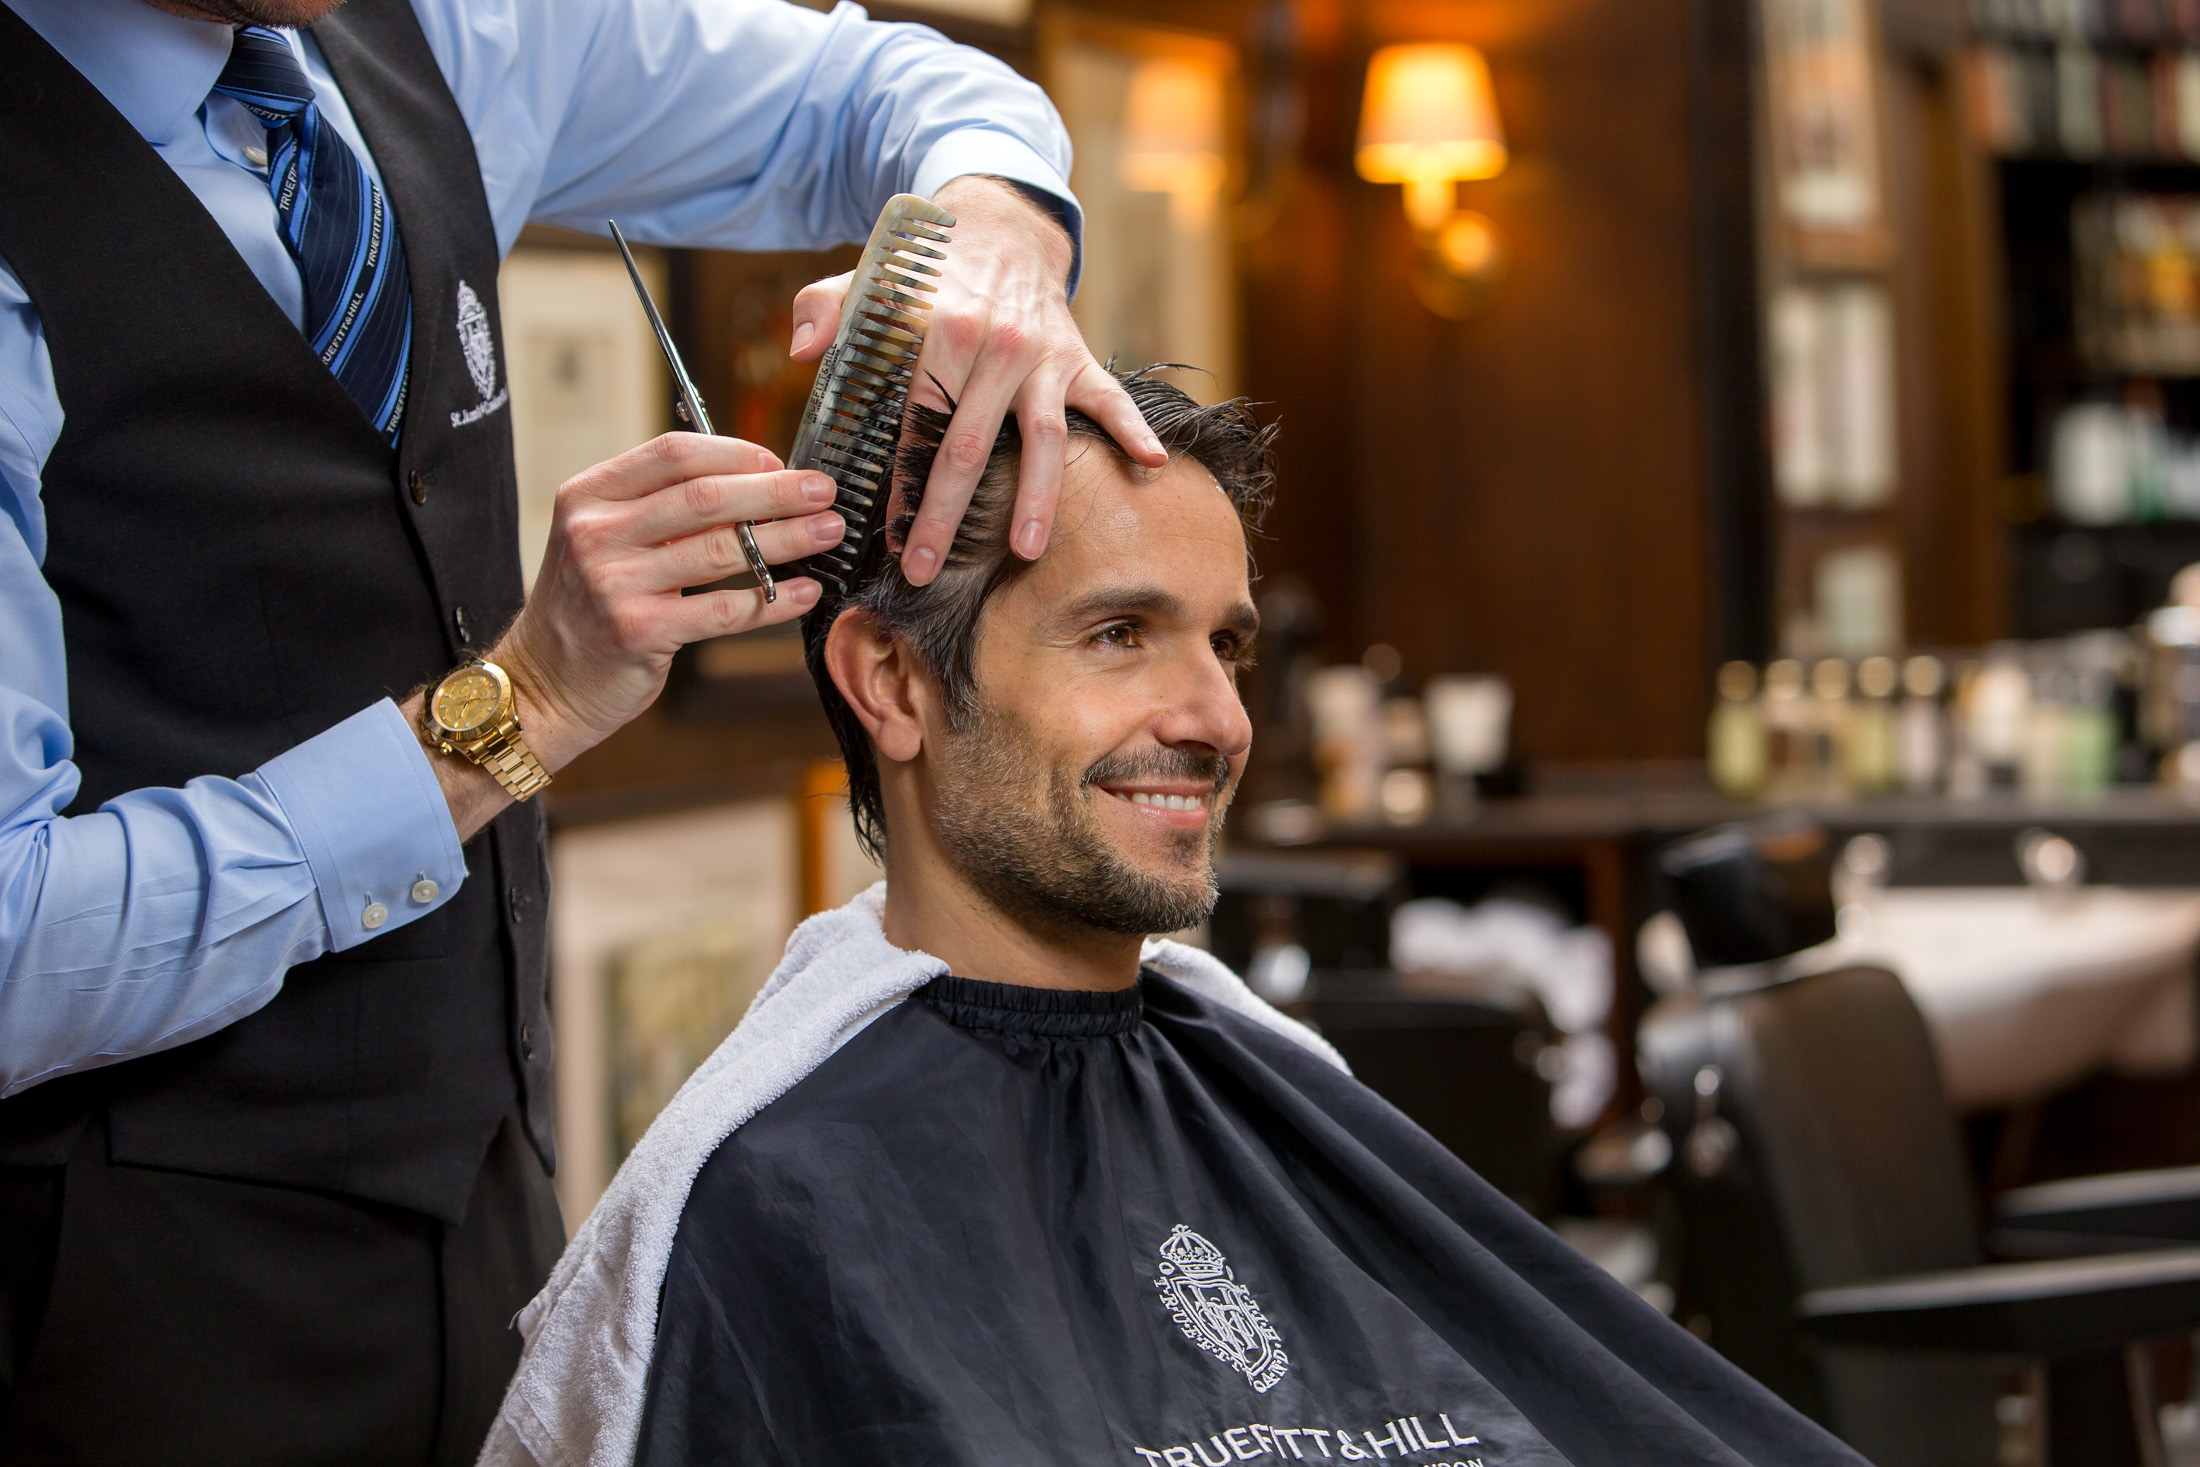 The £100 Mens' Haircut Has Arrived in London. Is It Worth It? - Bloomberg